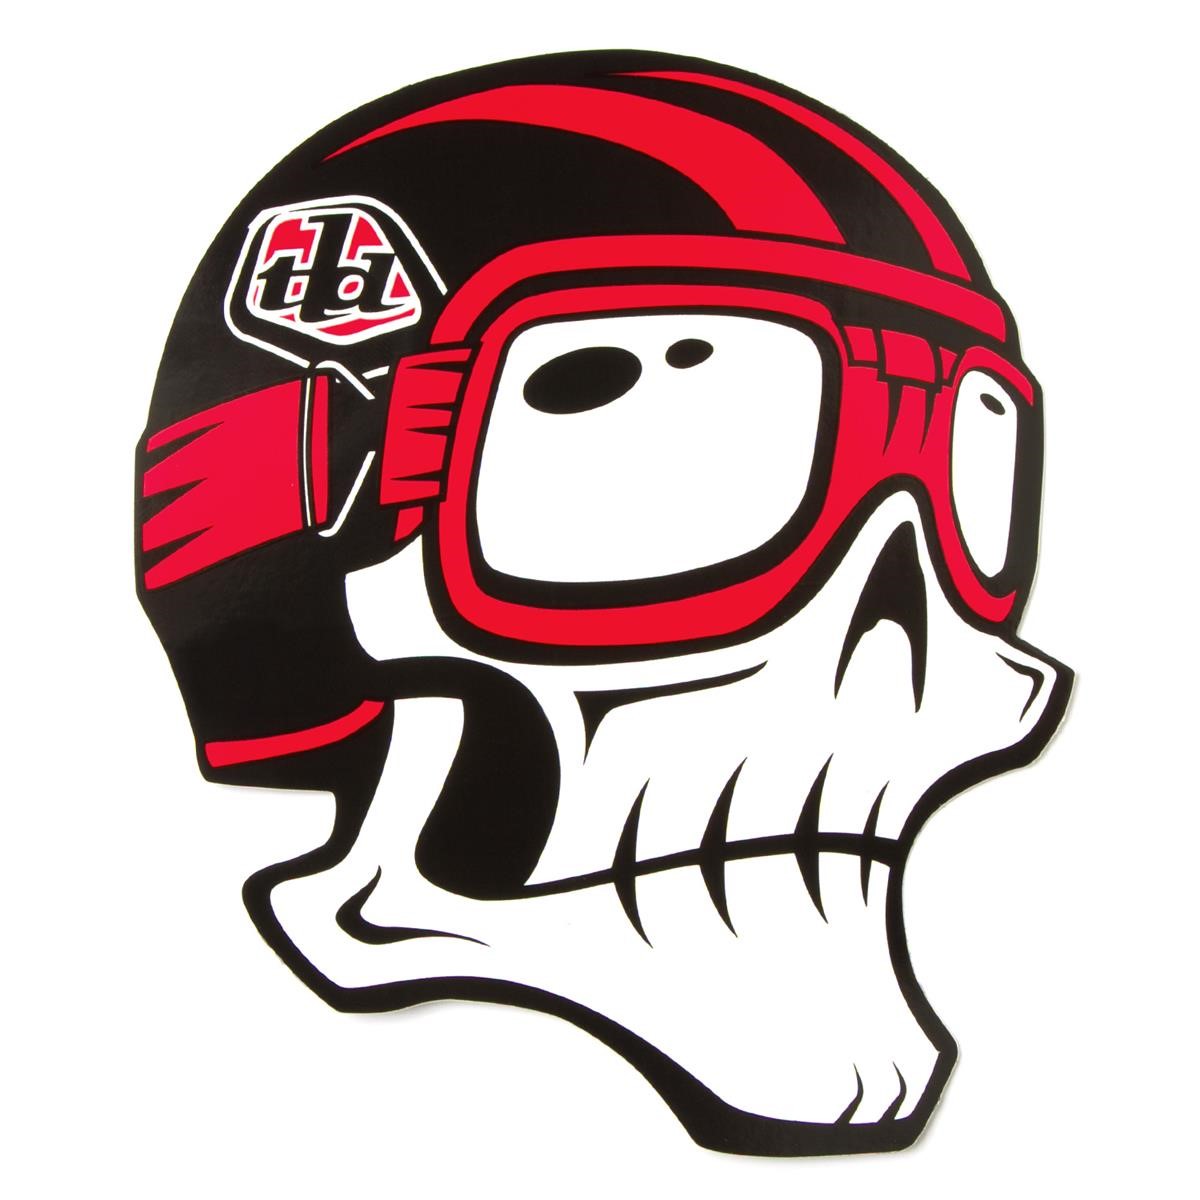 Troy Lee Designs Sticker Skully Black/Red - 5 inches